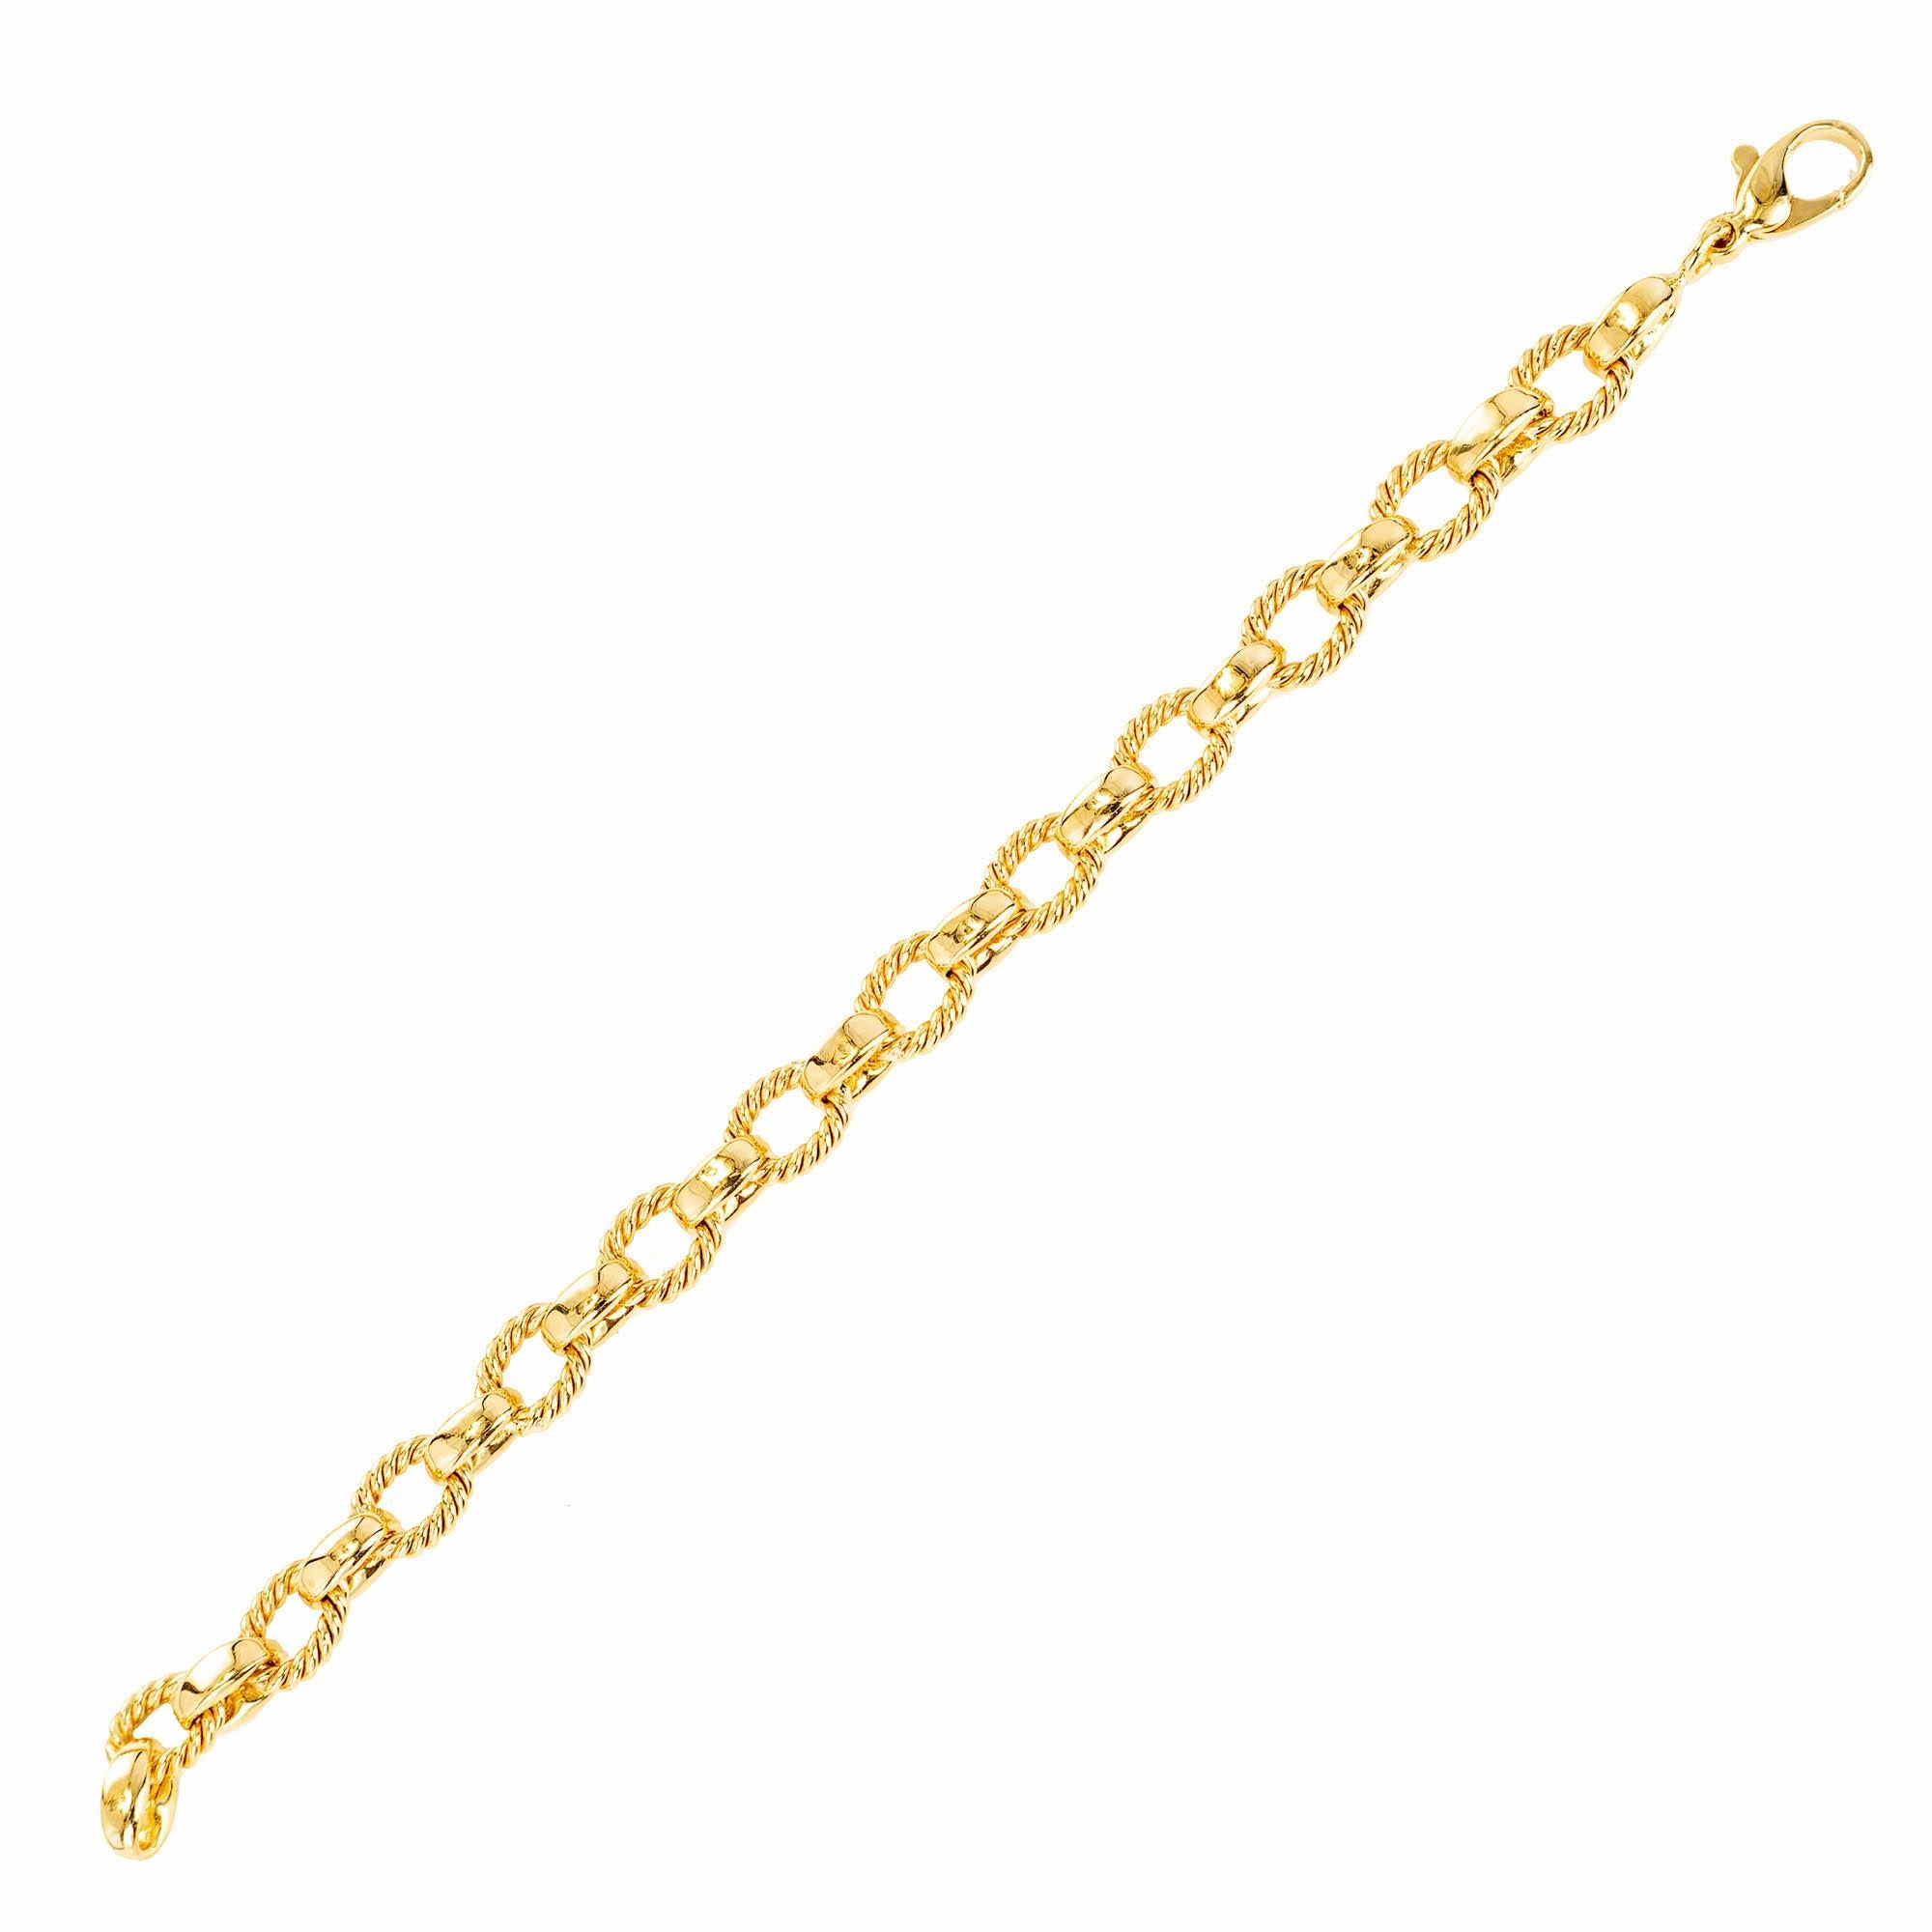 Fancy link chain bracelet in 18k yellow gold corrugated oval design links fastened by smaller high polish links with a lobster catch.  see our matching necklace and earrings.

18k Yellow Gold 
Stamped: 18k
31.7 grams
Bracelet/ Chain: 7 ¼